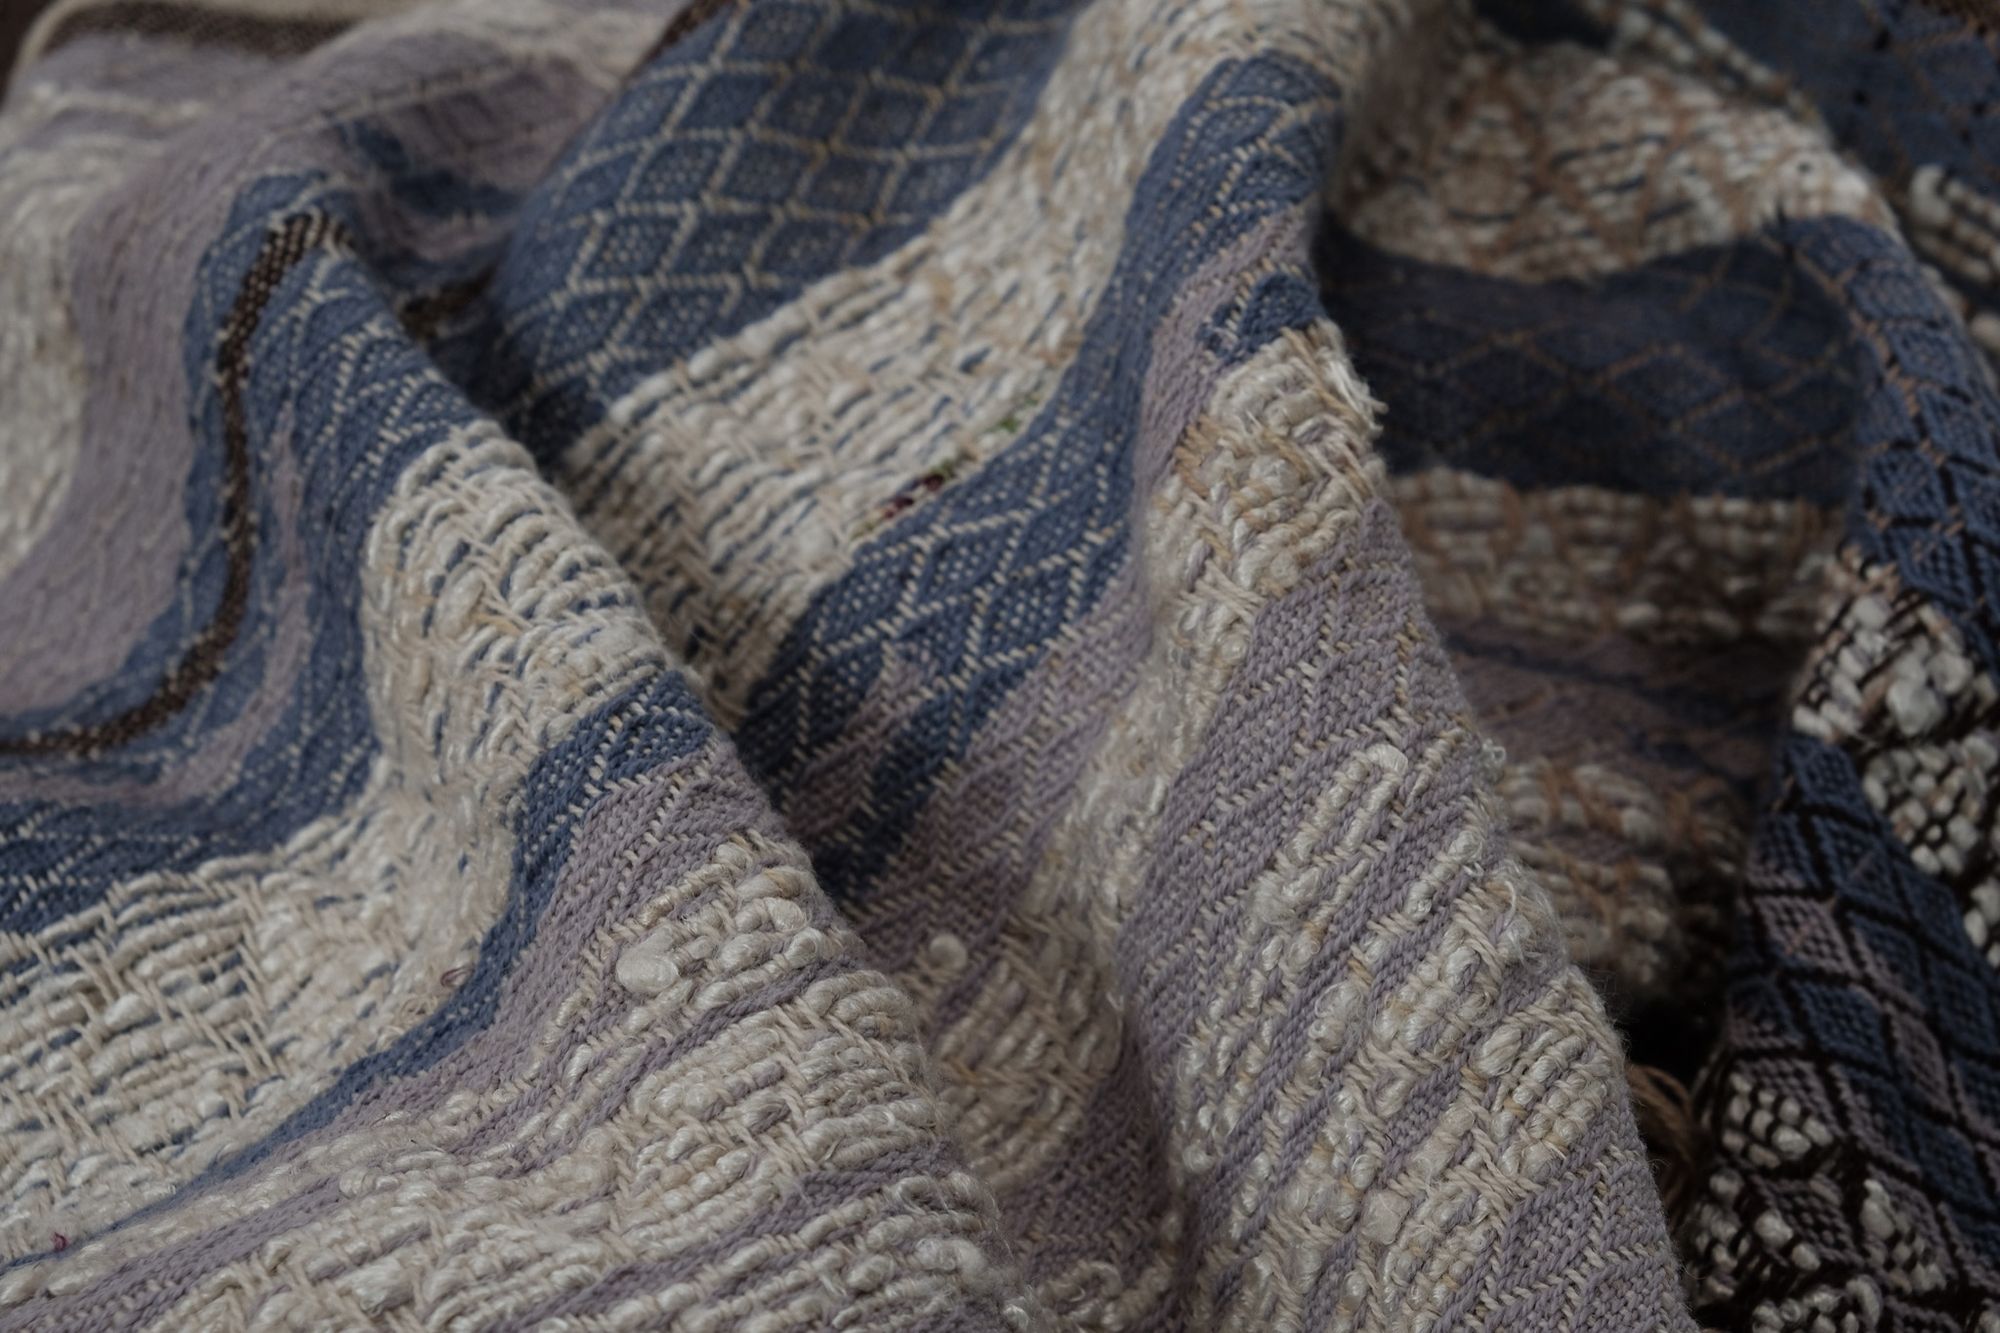 A long piece of handwoven fabric with diamond pattern in lilac purple, dark brown and earth tones is resting on a wooden floor with details of banana silk shown prominently 